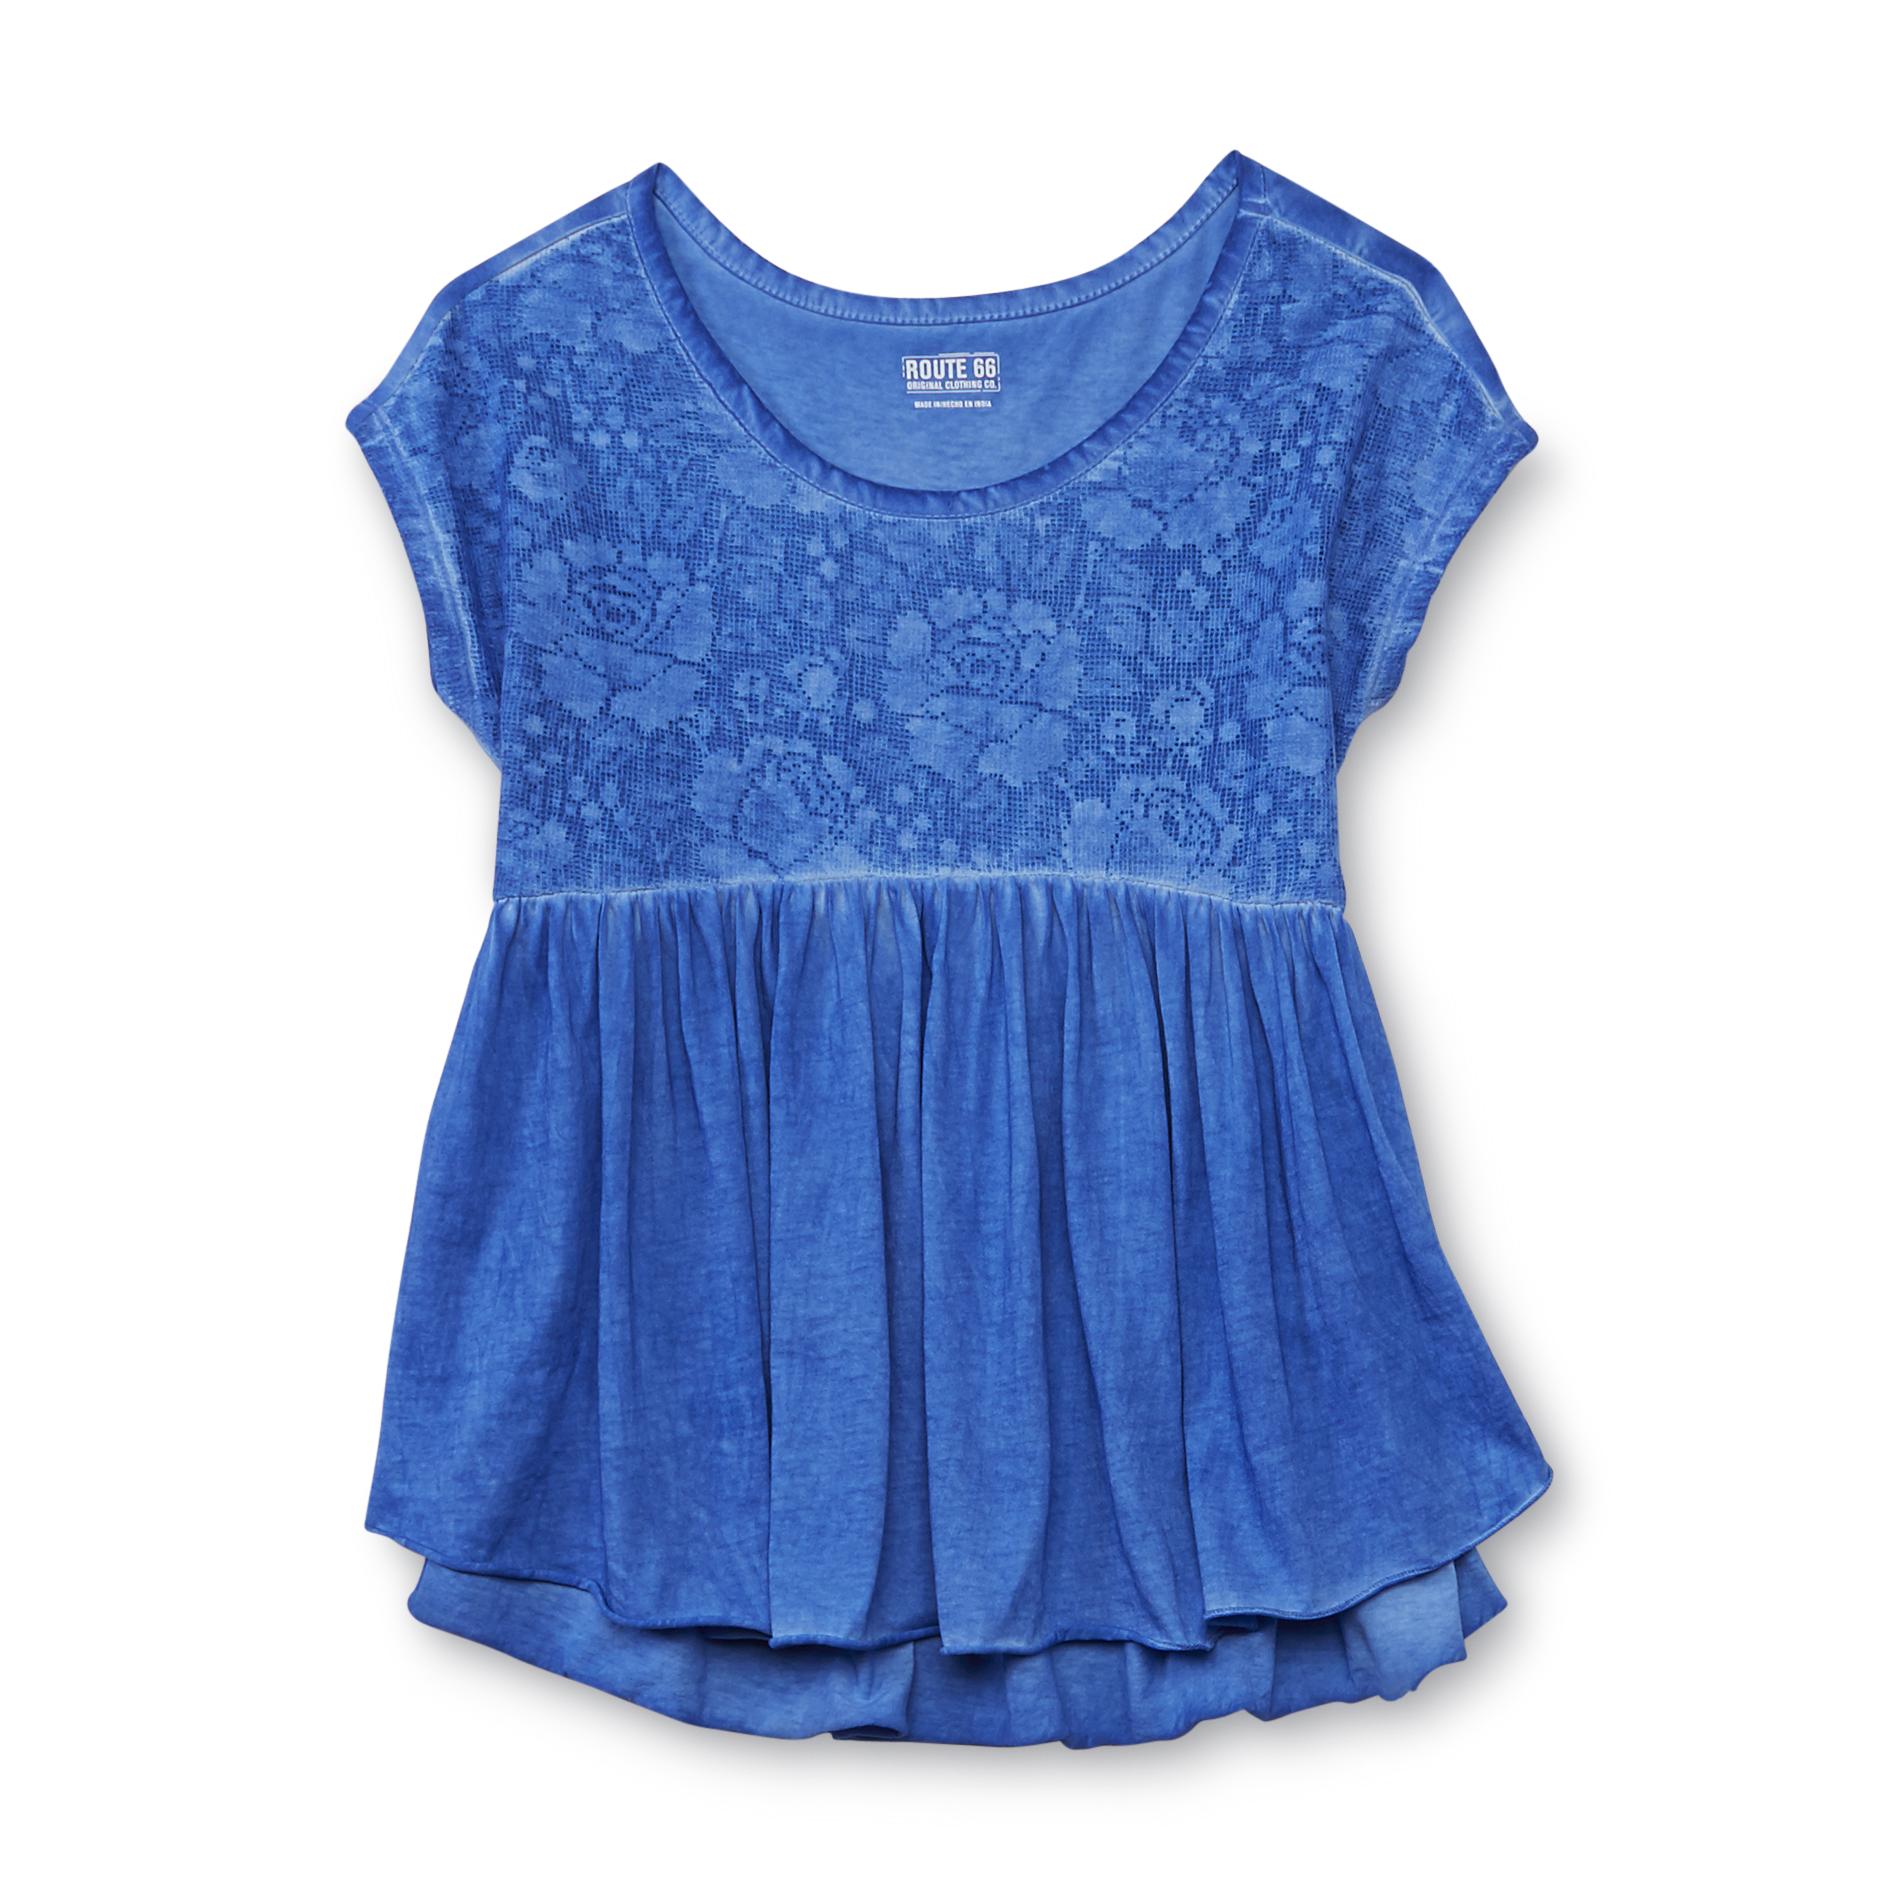 Route 66 Girl's Babydoll Top - Lace